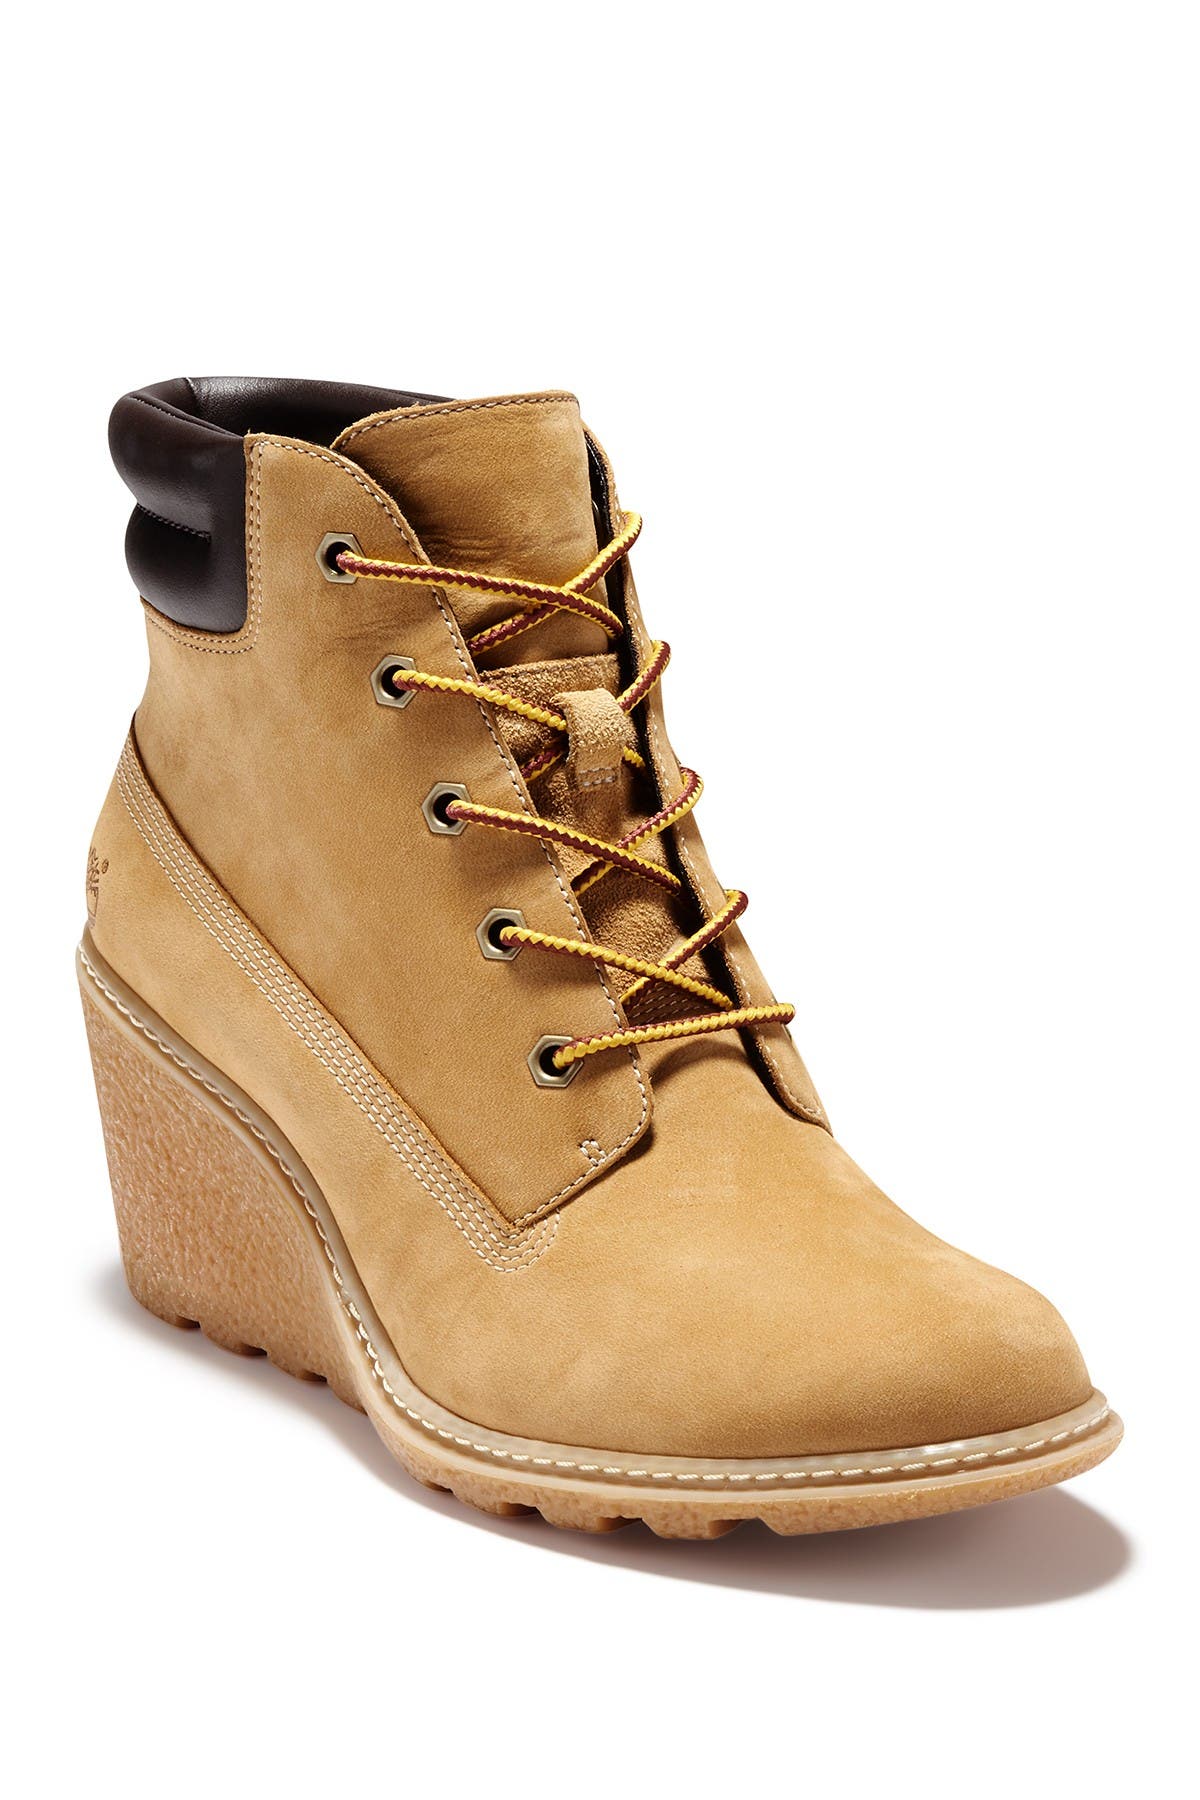 wedge boots timberland